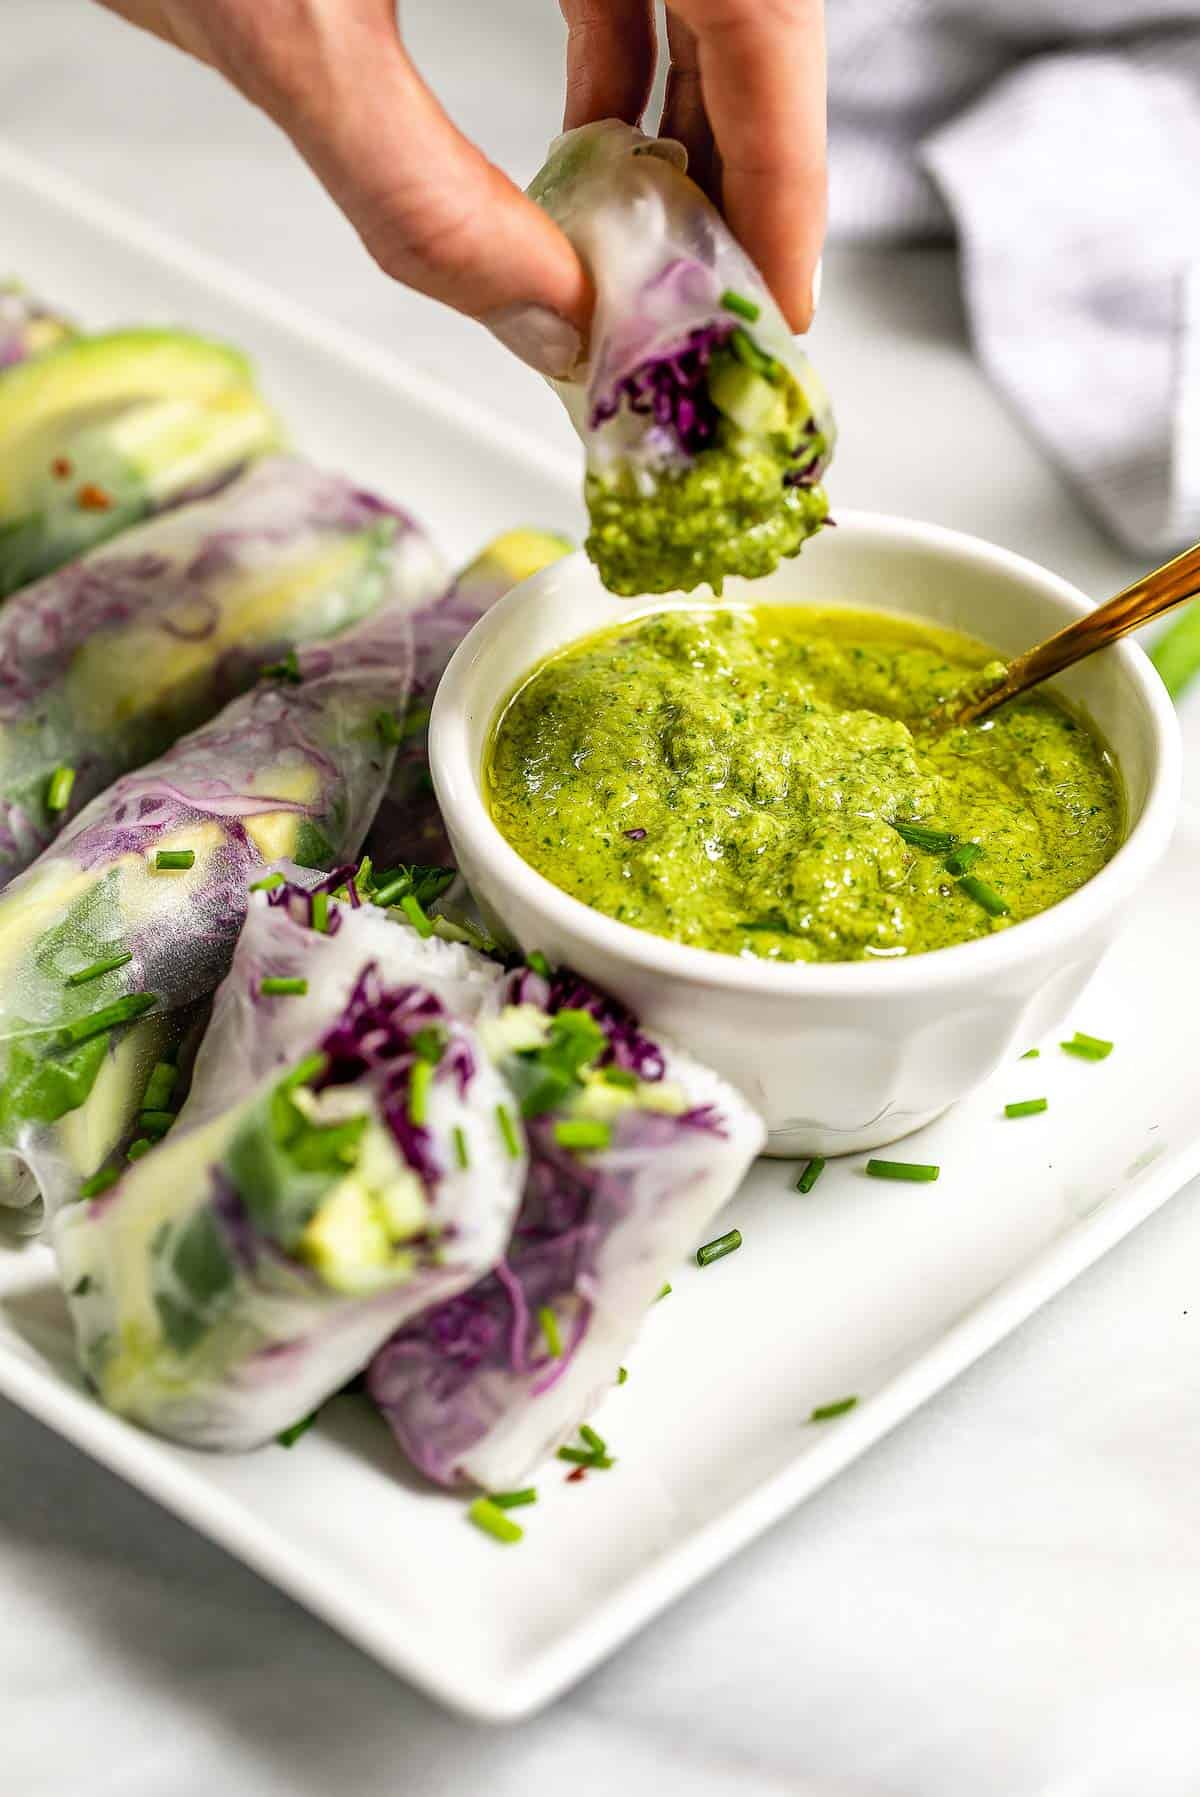 dipping the roll into the pesto sauce